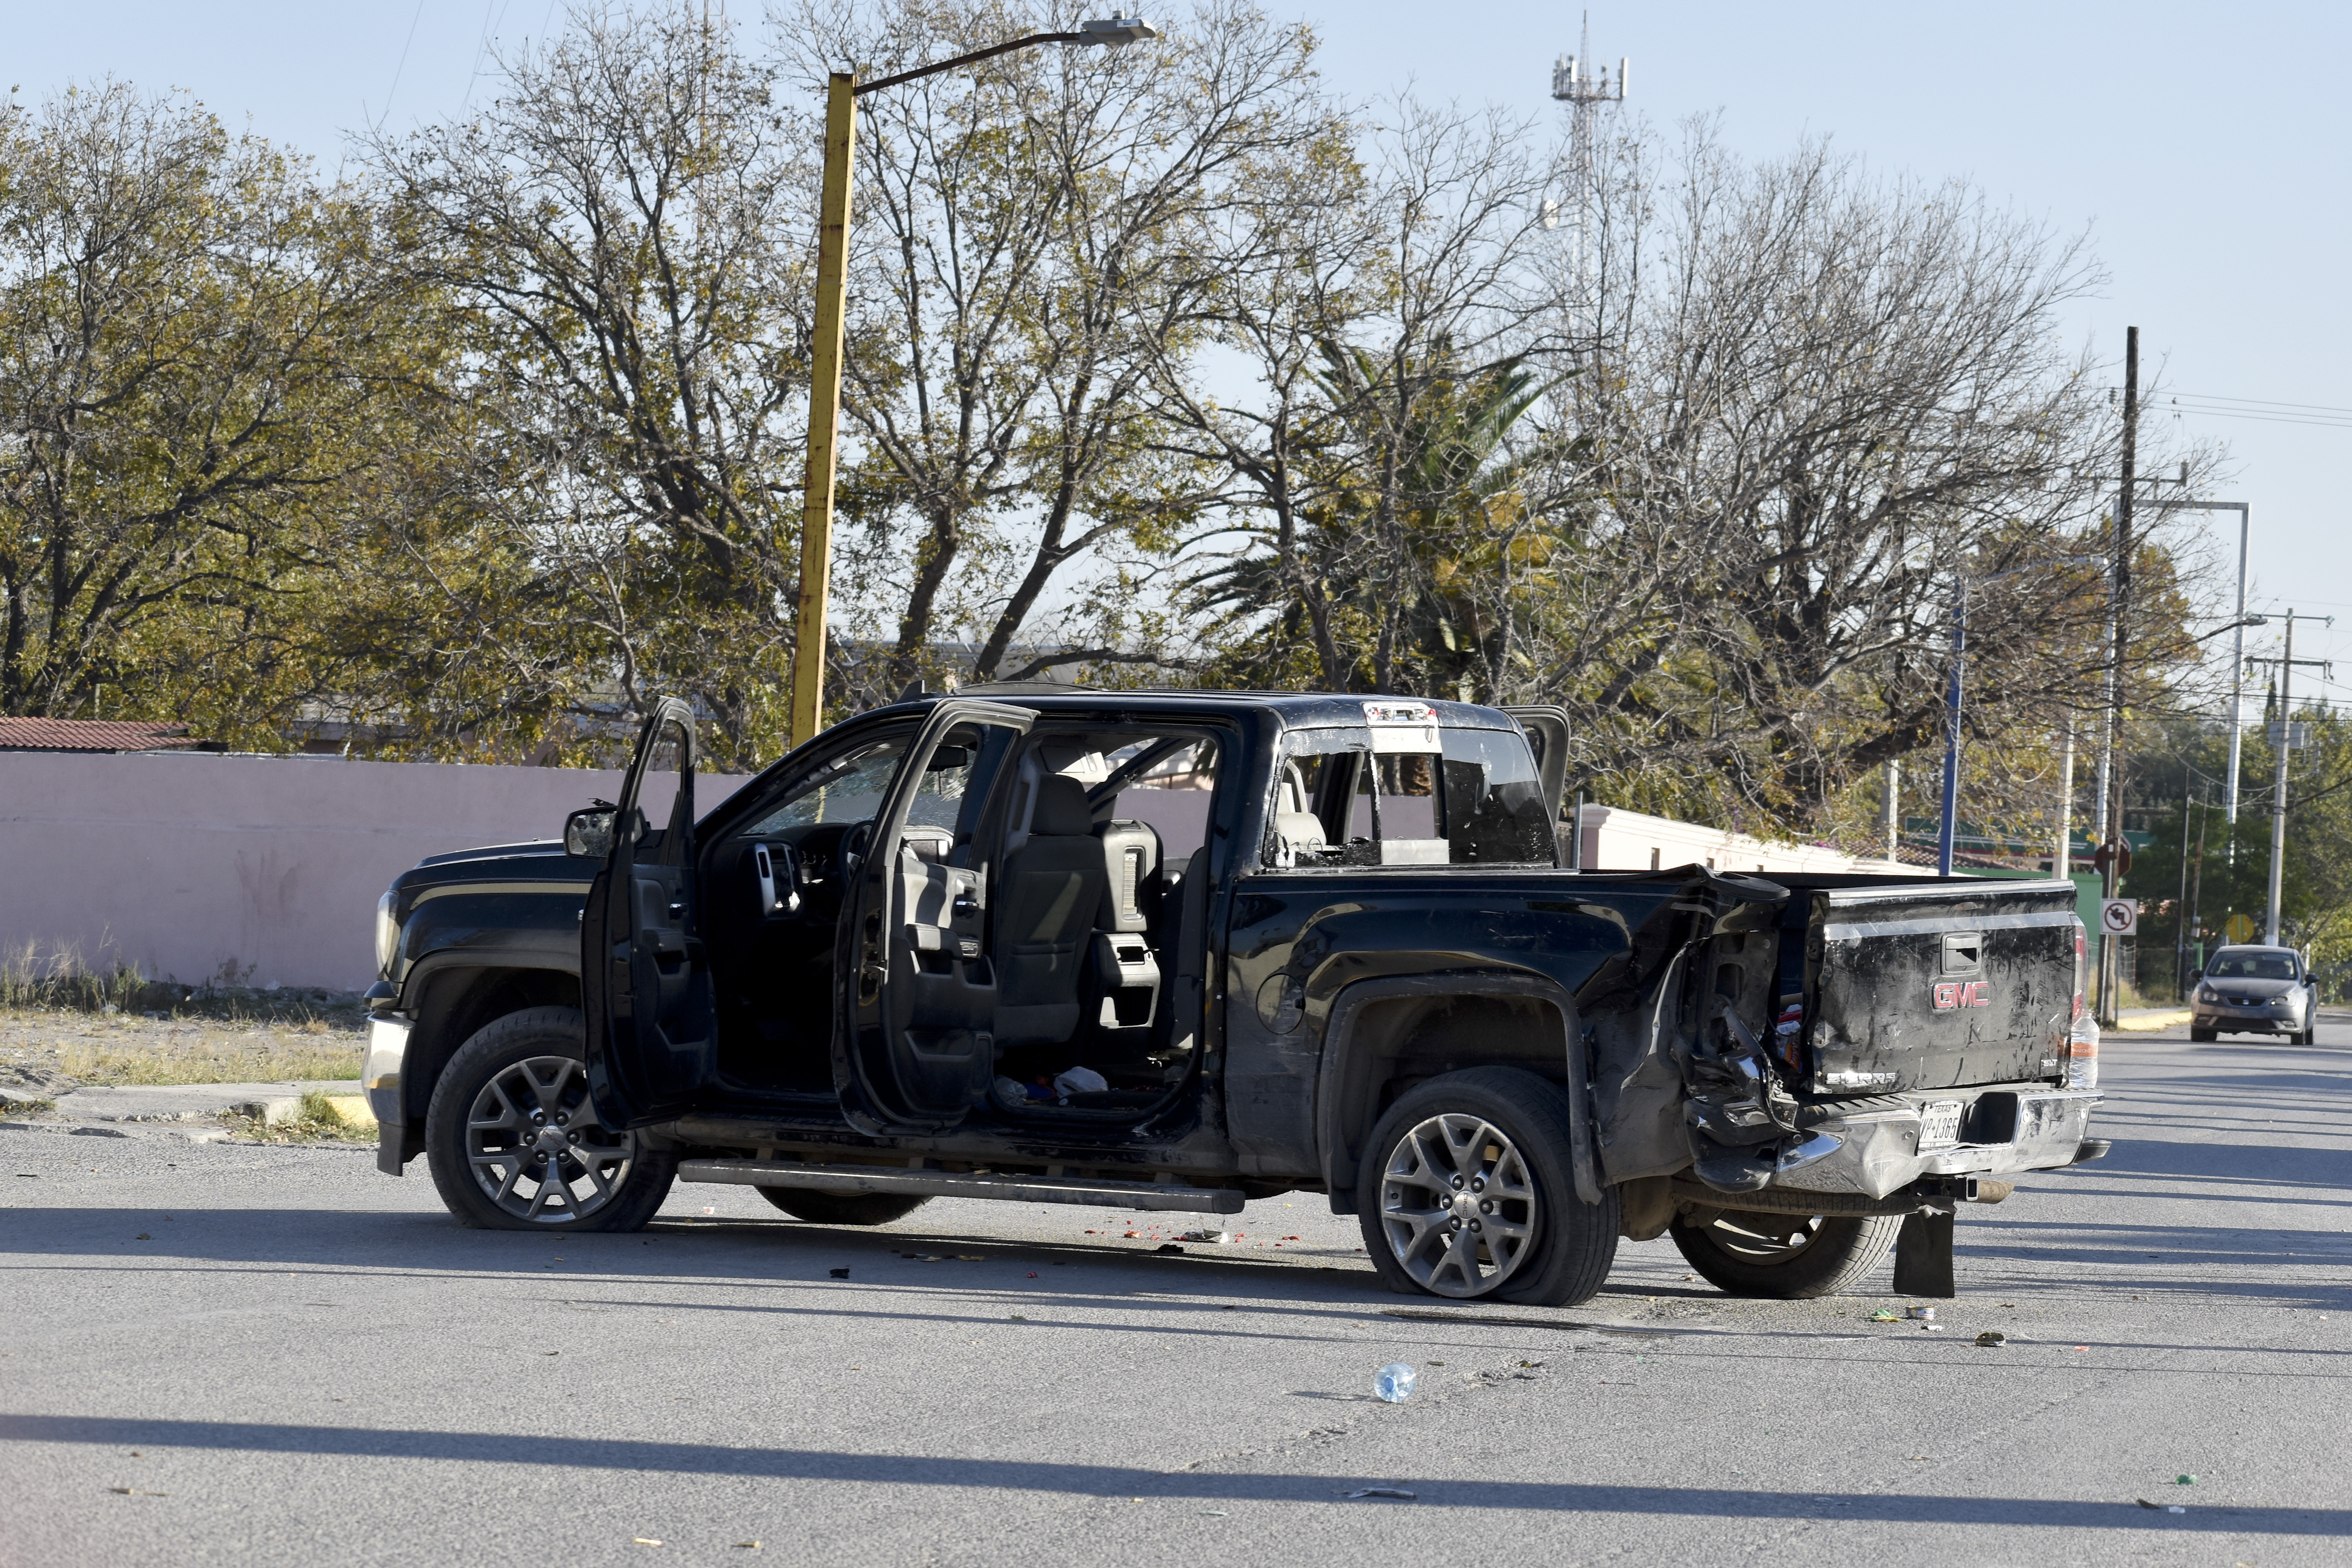 19 people killed in gunfight in Mexico